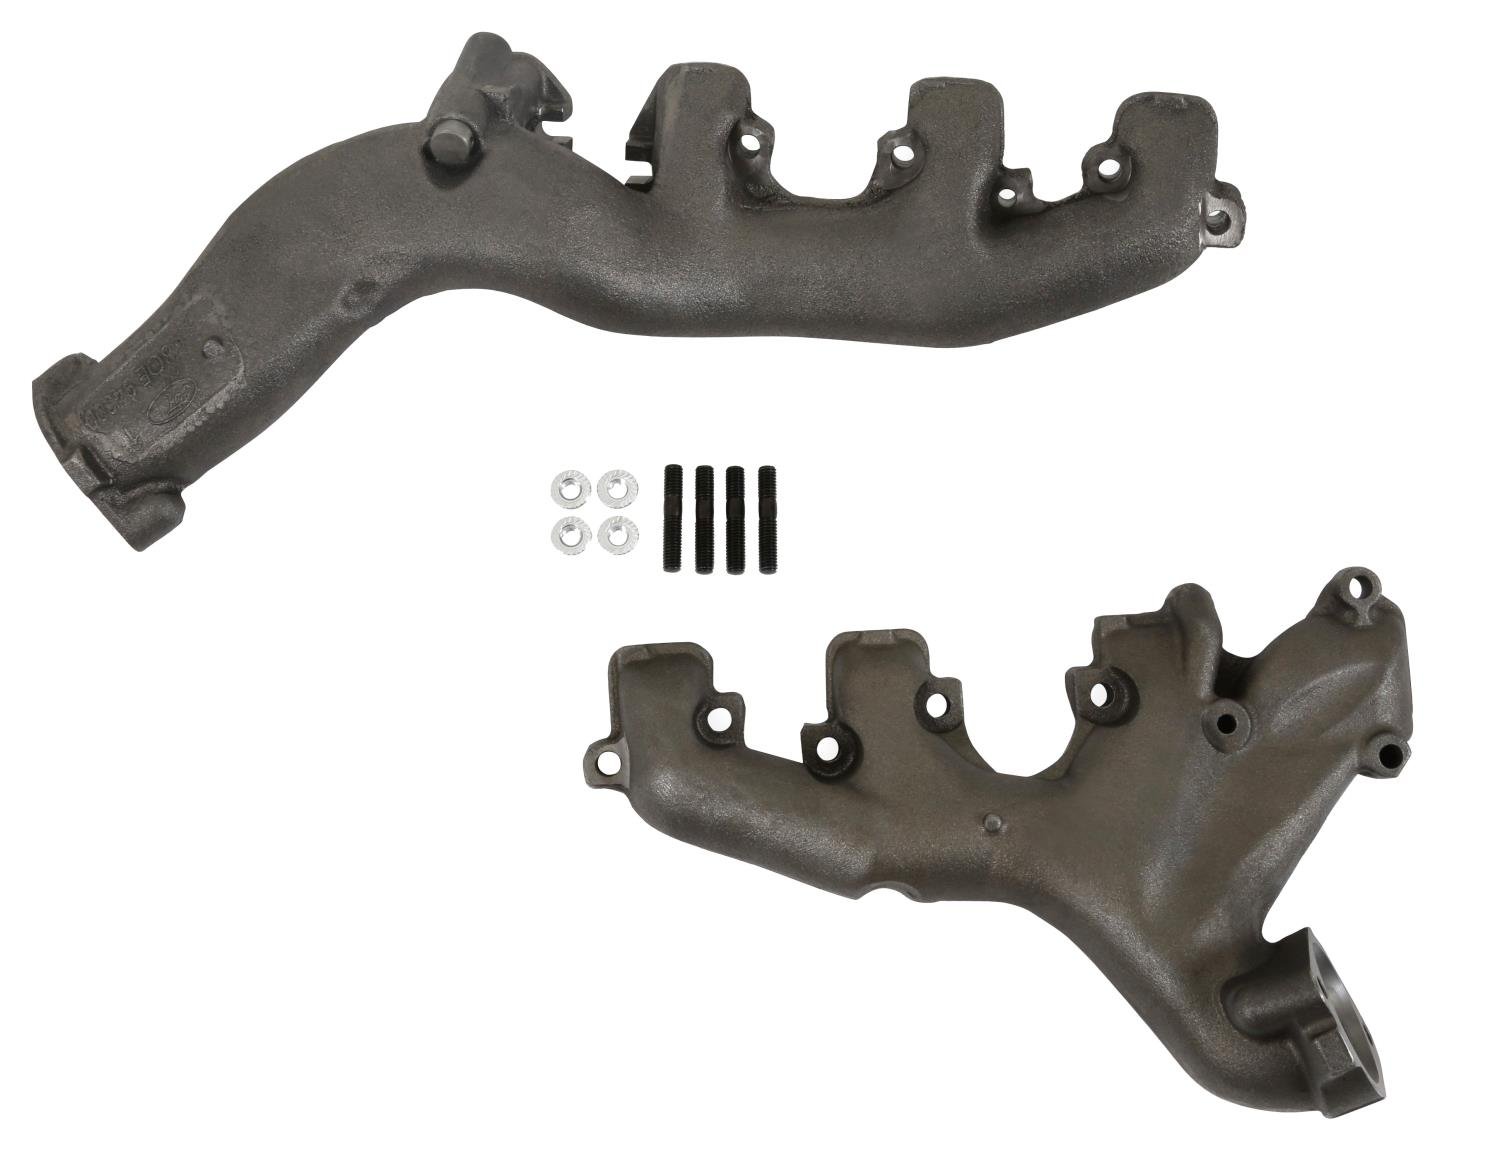 Exhaust Manifolds Fits Late 1969-1970 Ford Cobra Jet 428 Engine